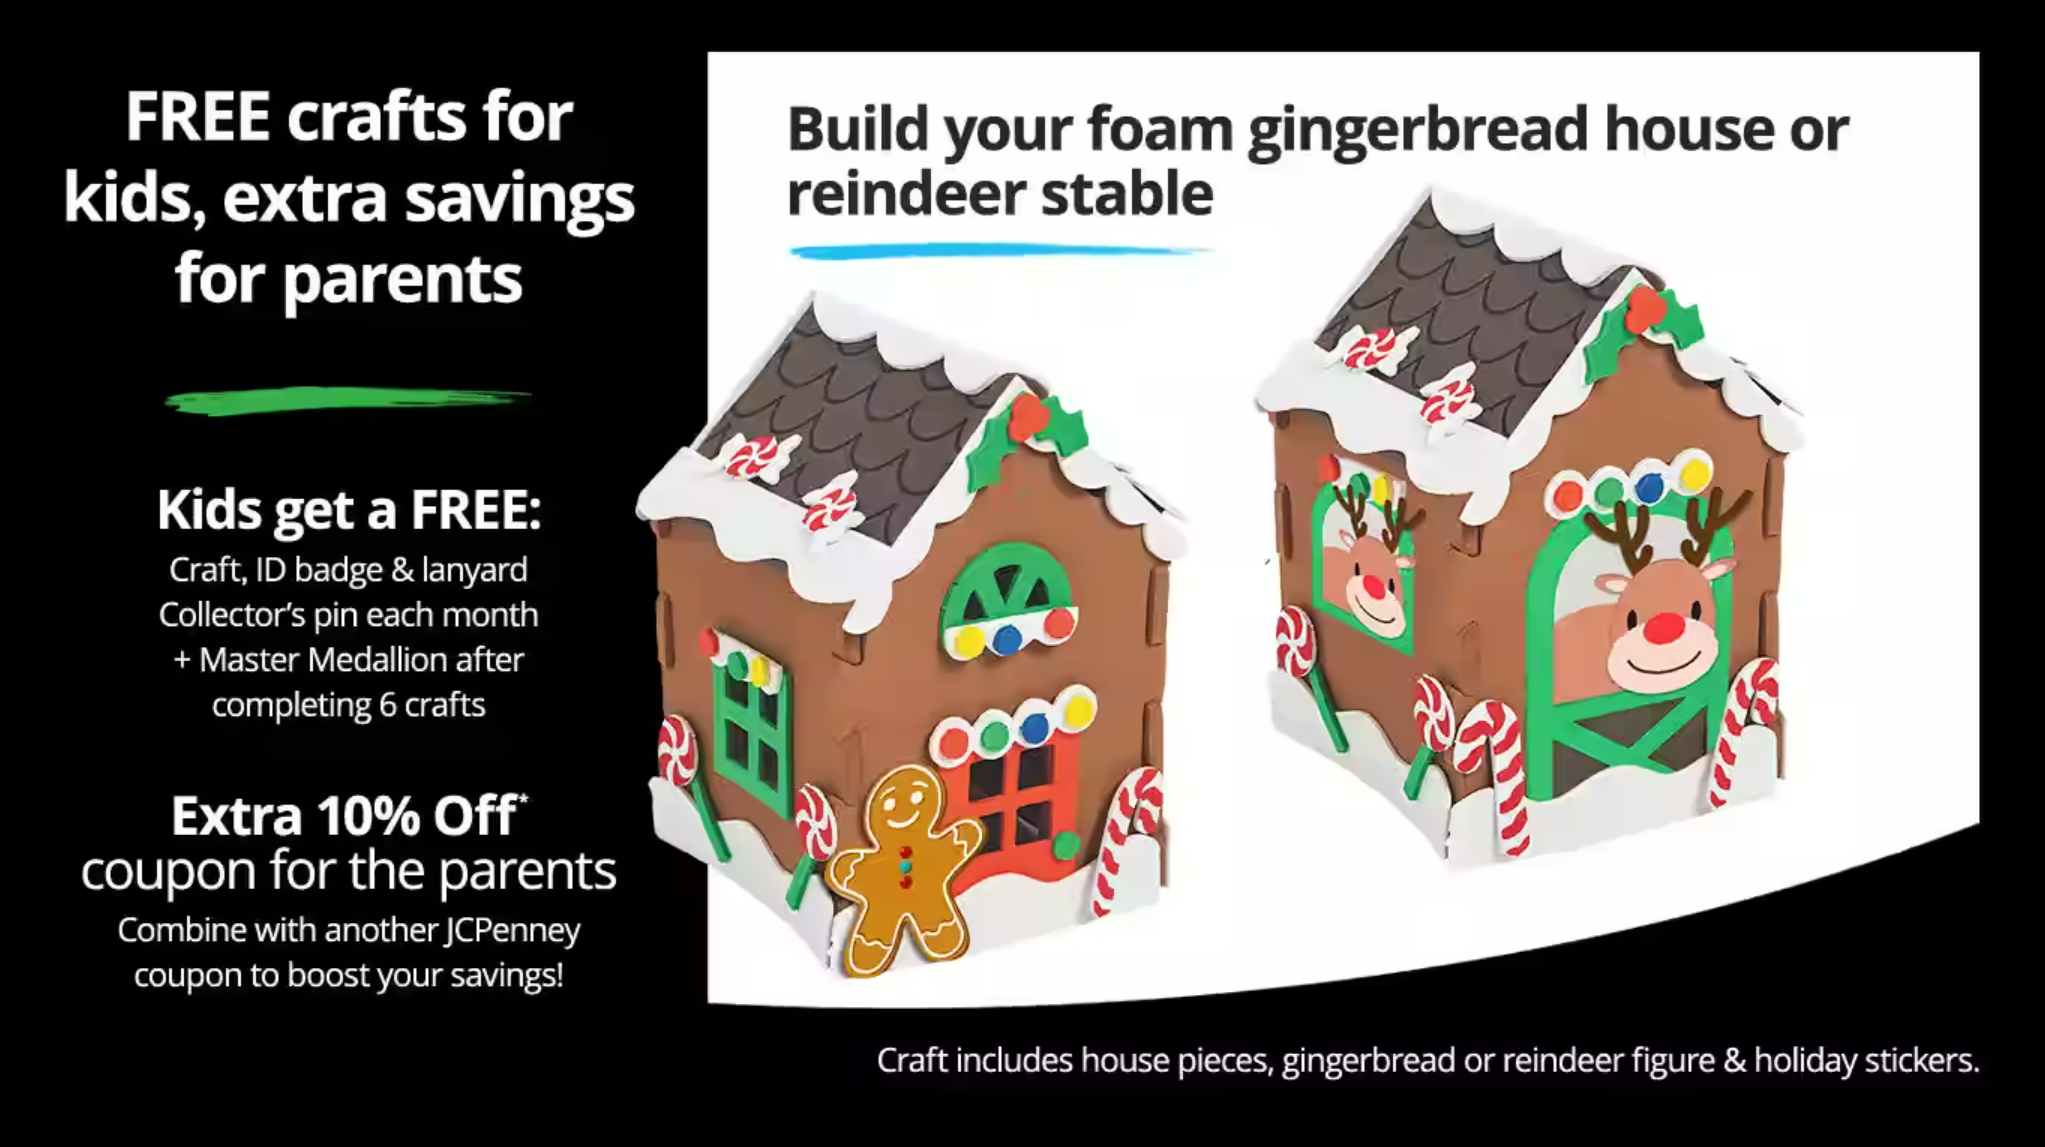 FREE Gingerbread House or Reindeer Stable Craft Activity at JCPenney Kids Zone on December 10th